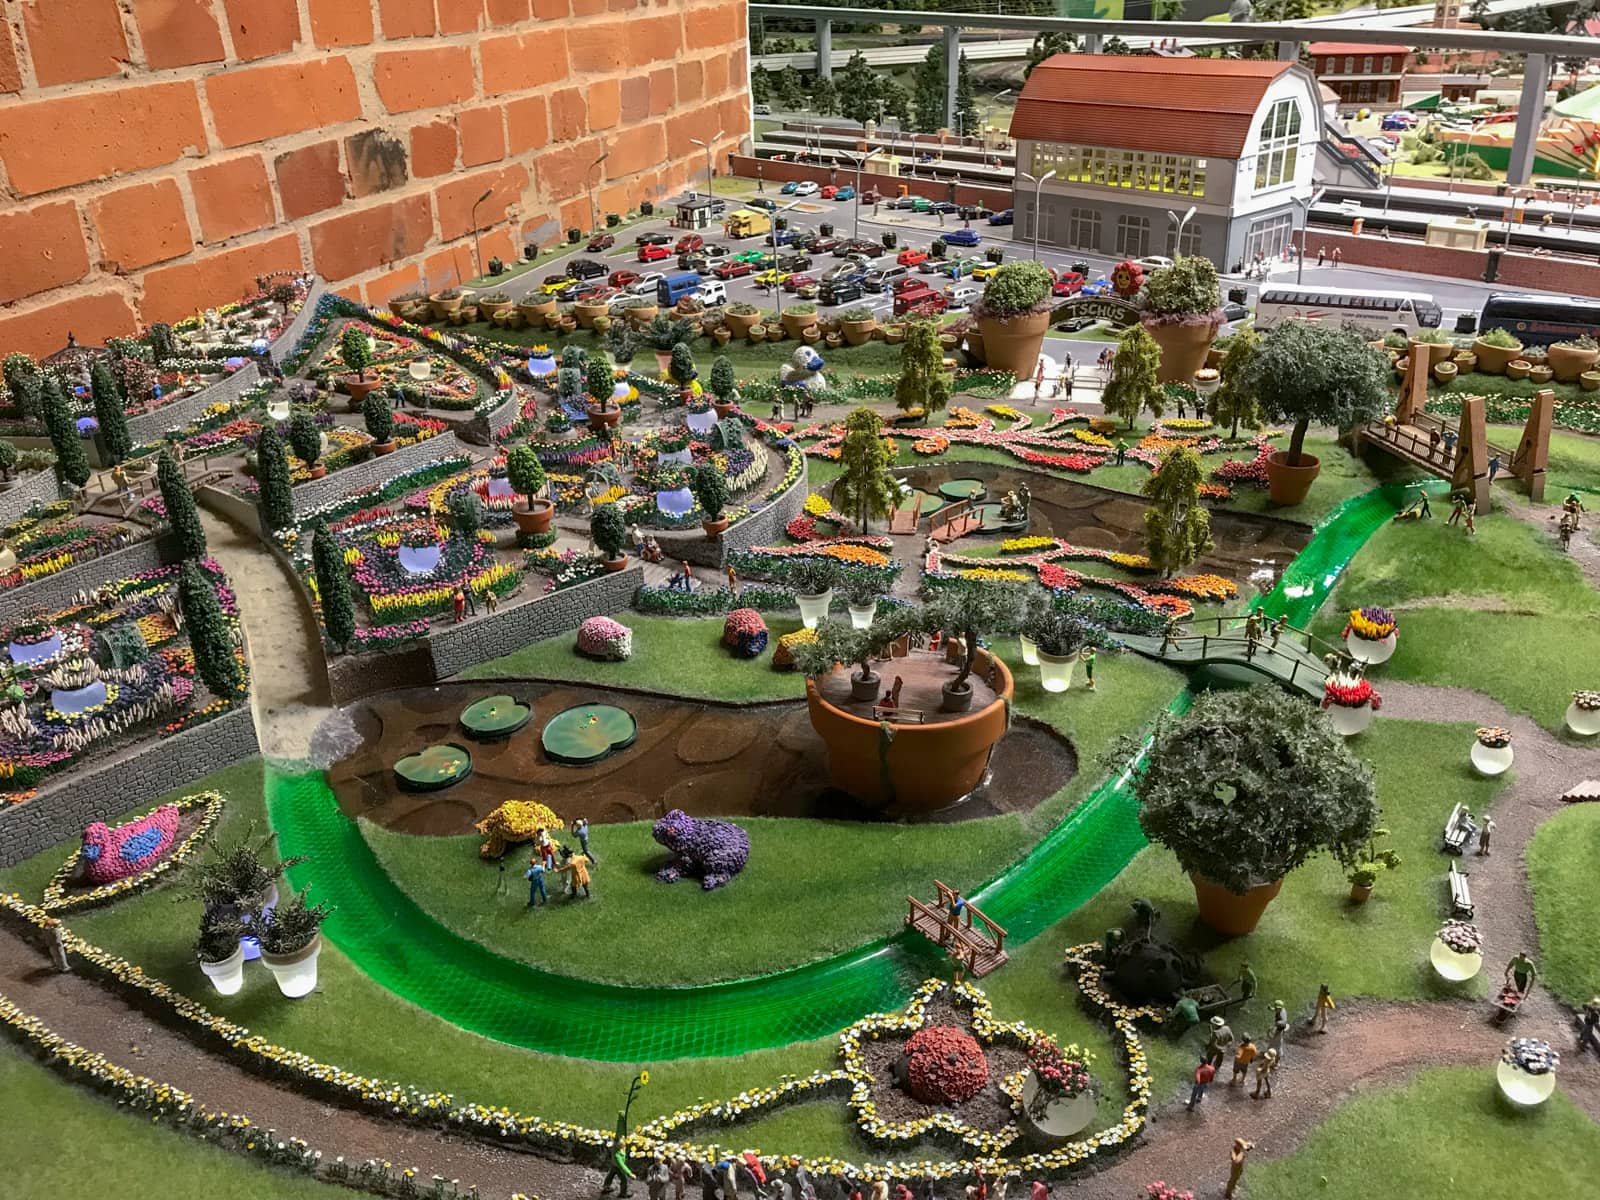 Another miniature replica of a garden with green lawns and tiny colourful plants